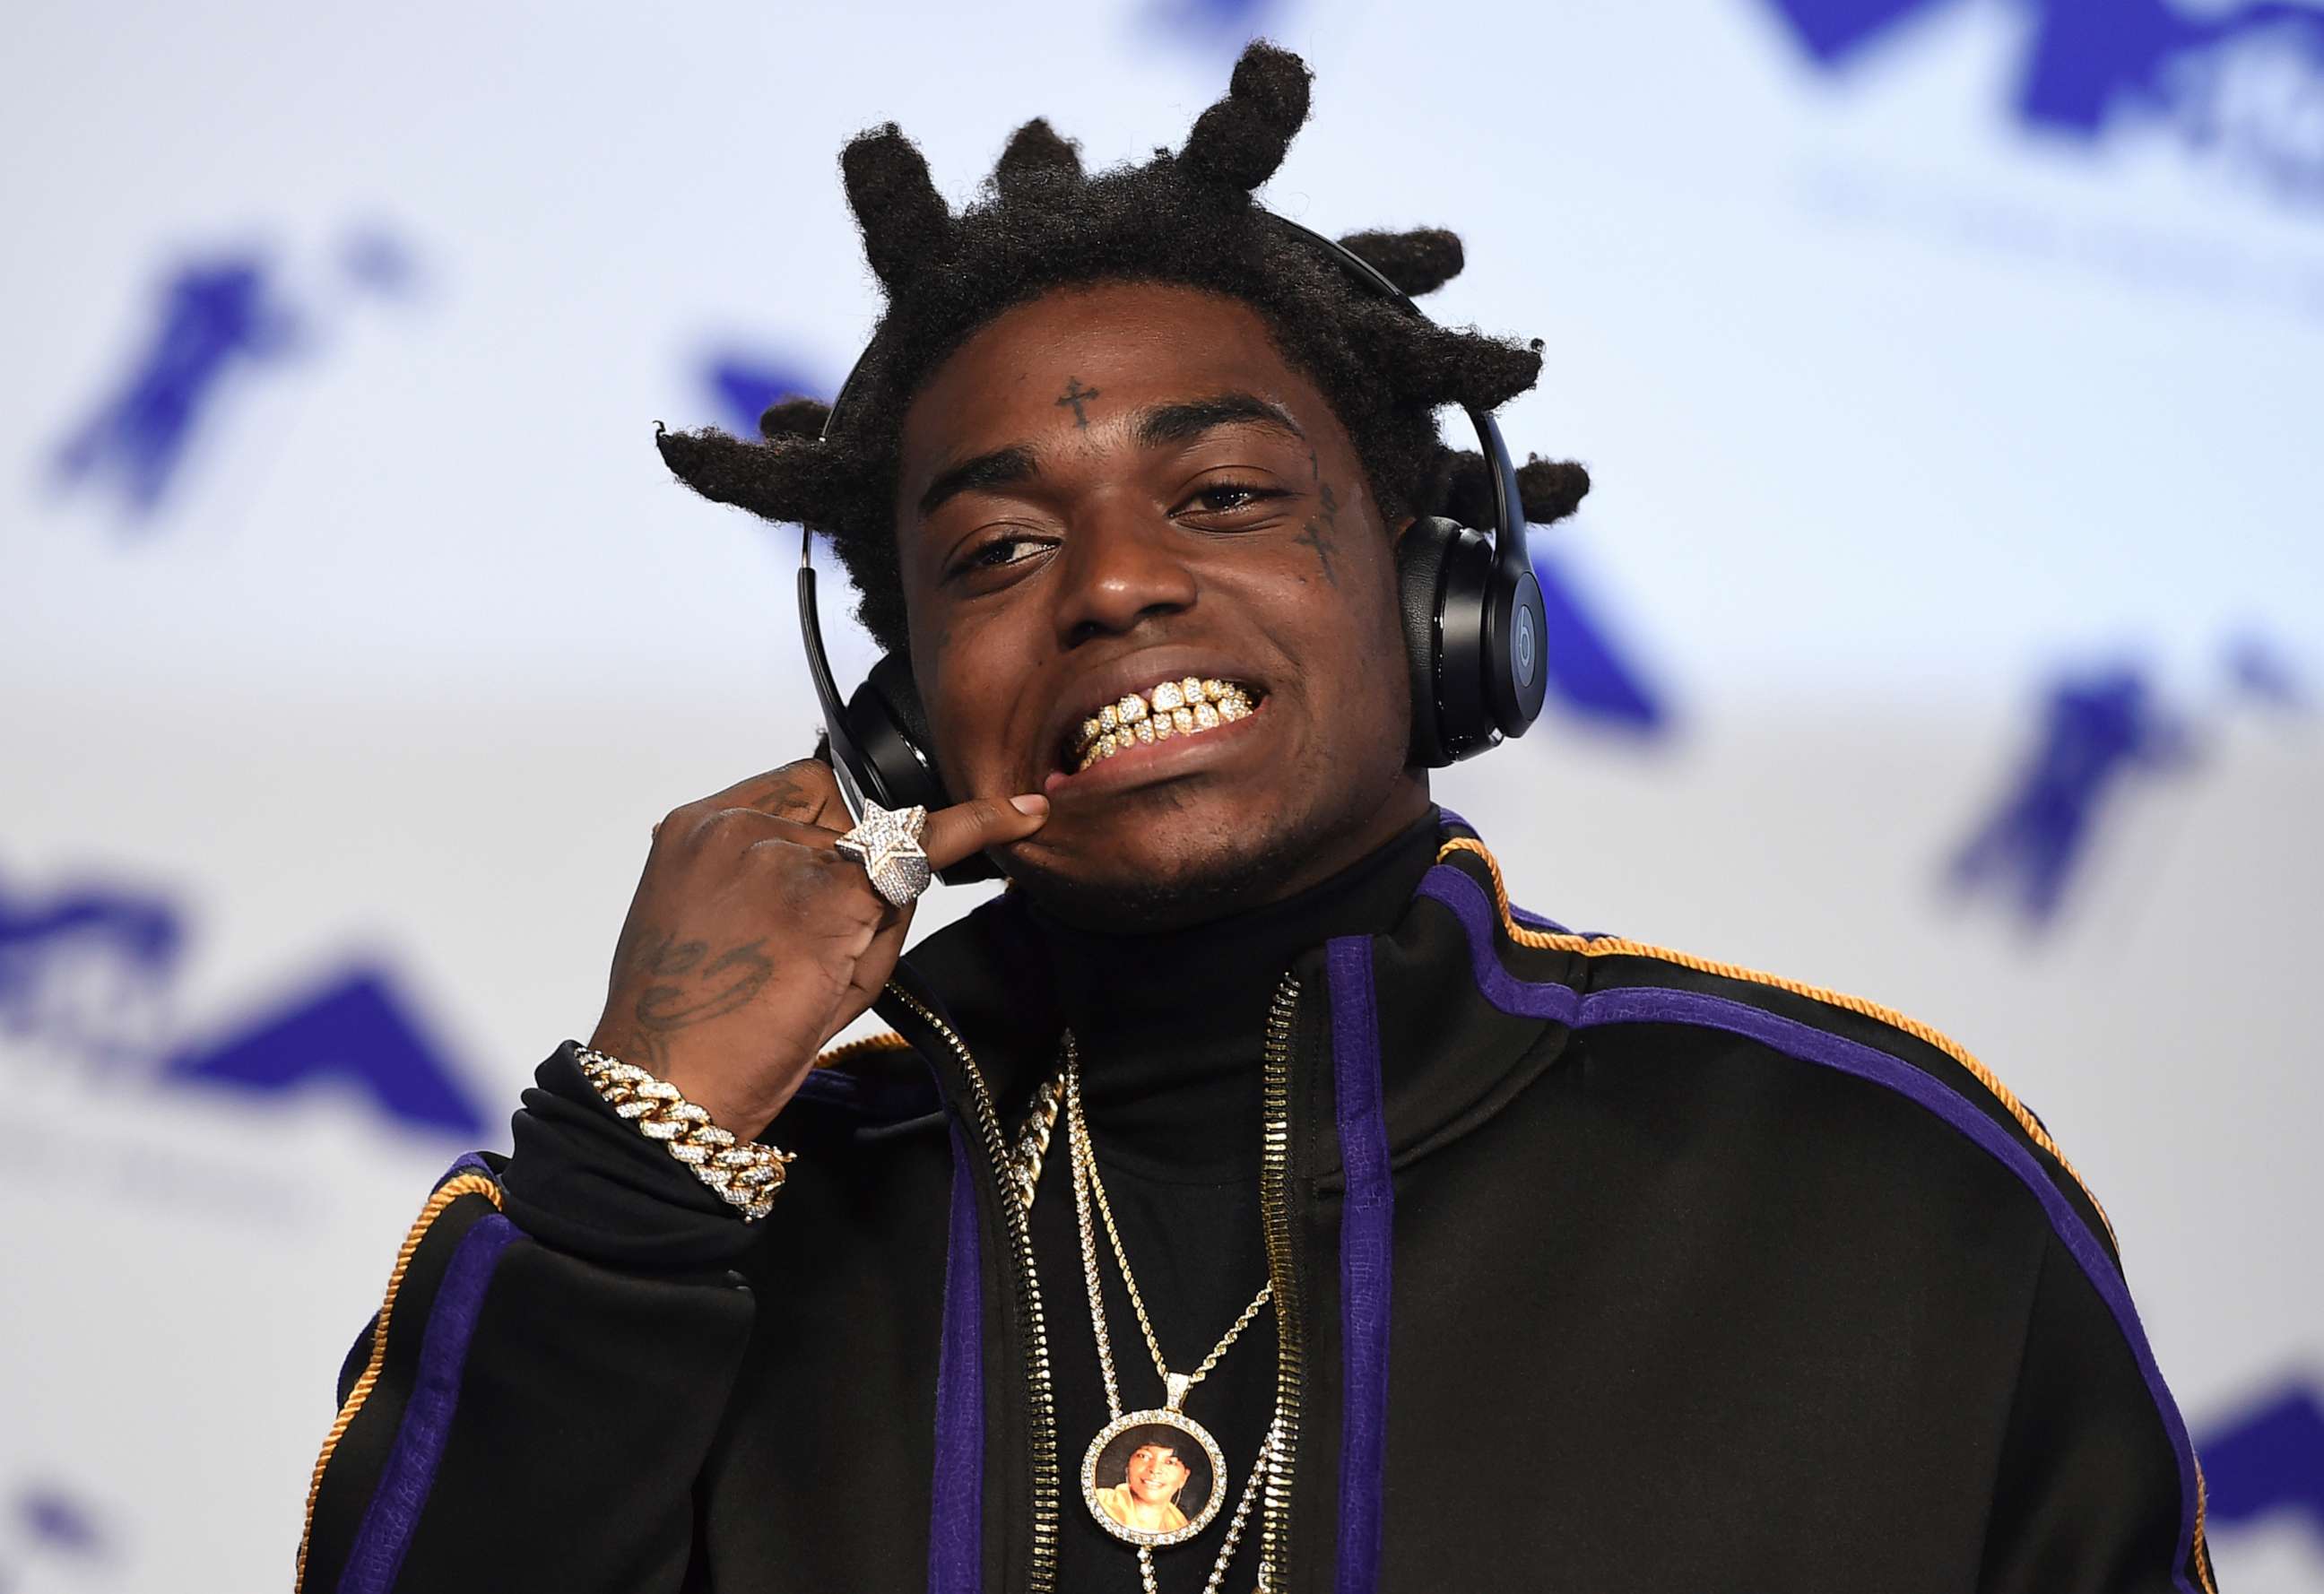 PHOTO: Kodak Black arrives at the MTV Video Music Awards at The Forum on Aug. 27, 2017, in Inglewood, Calif. A Florida judge issued an arrest warrant for the rapper, whose given name is Bill Kapri, on Thursday, Feb. 23, 2023.